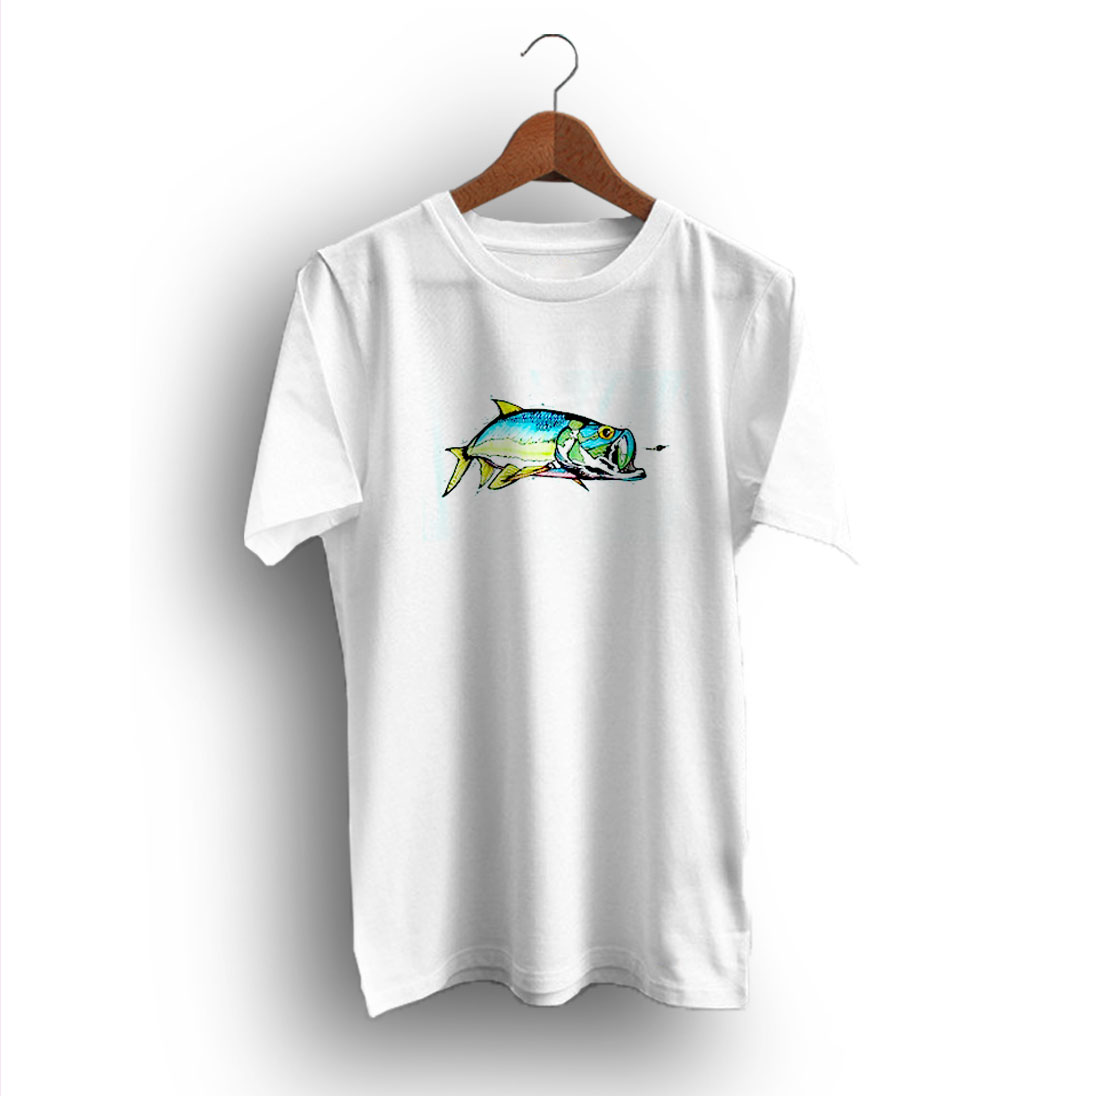 https://www.bigvero.com/wp-content/uploads/2019/12/Awesome-Graphic-Selection-Of-Fish-Patagonia-T-Shirt.jpg